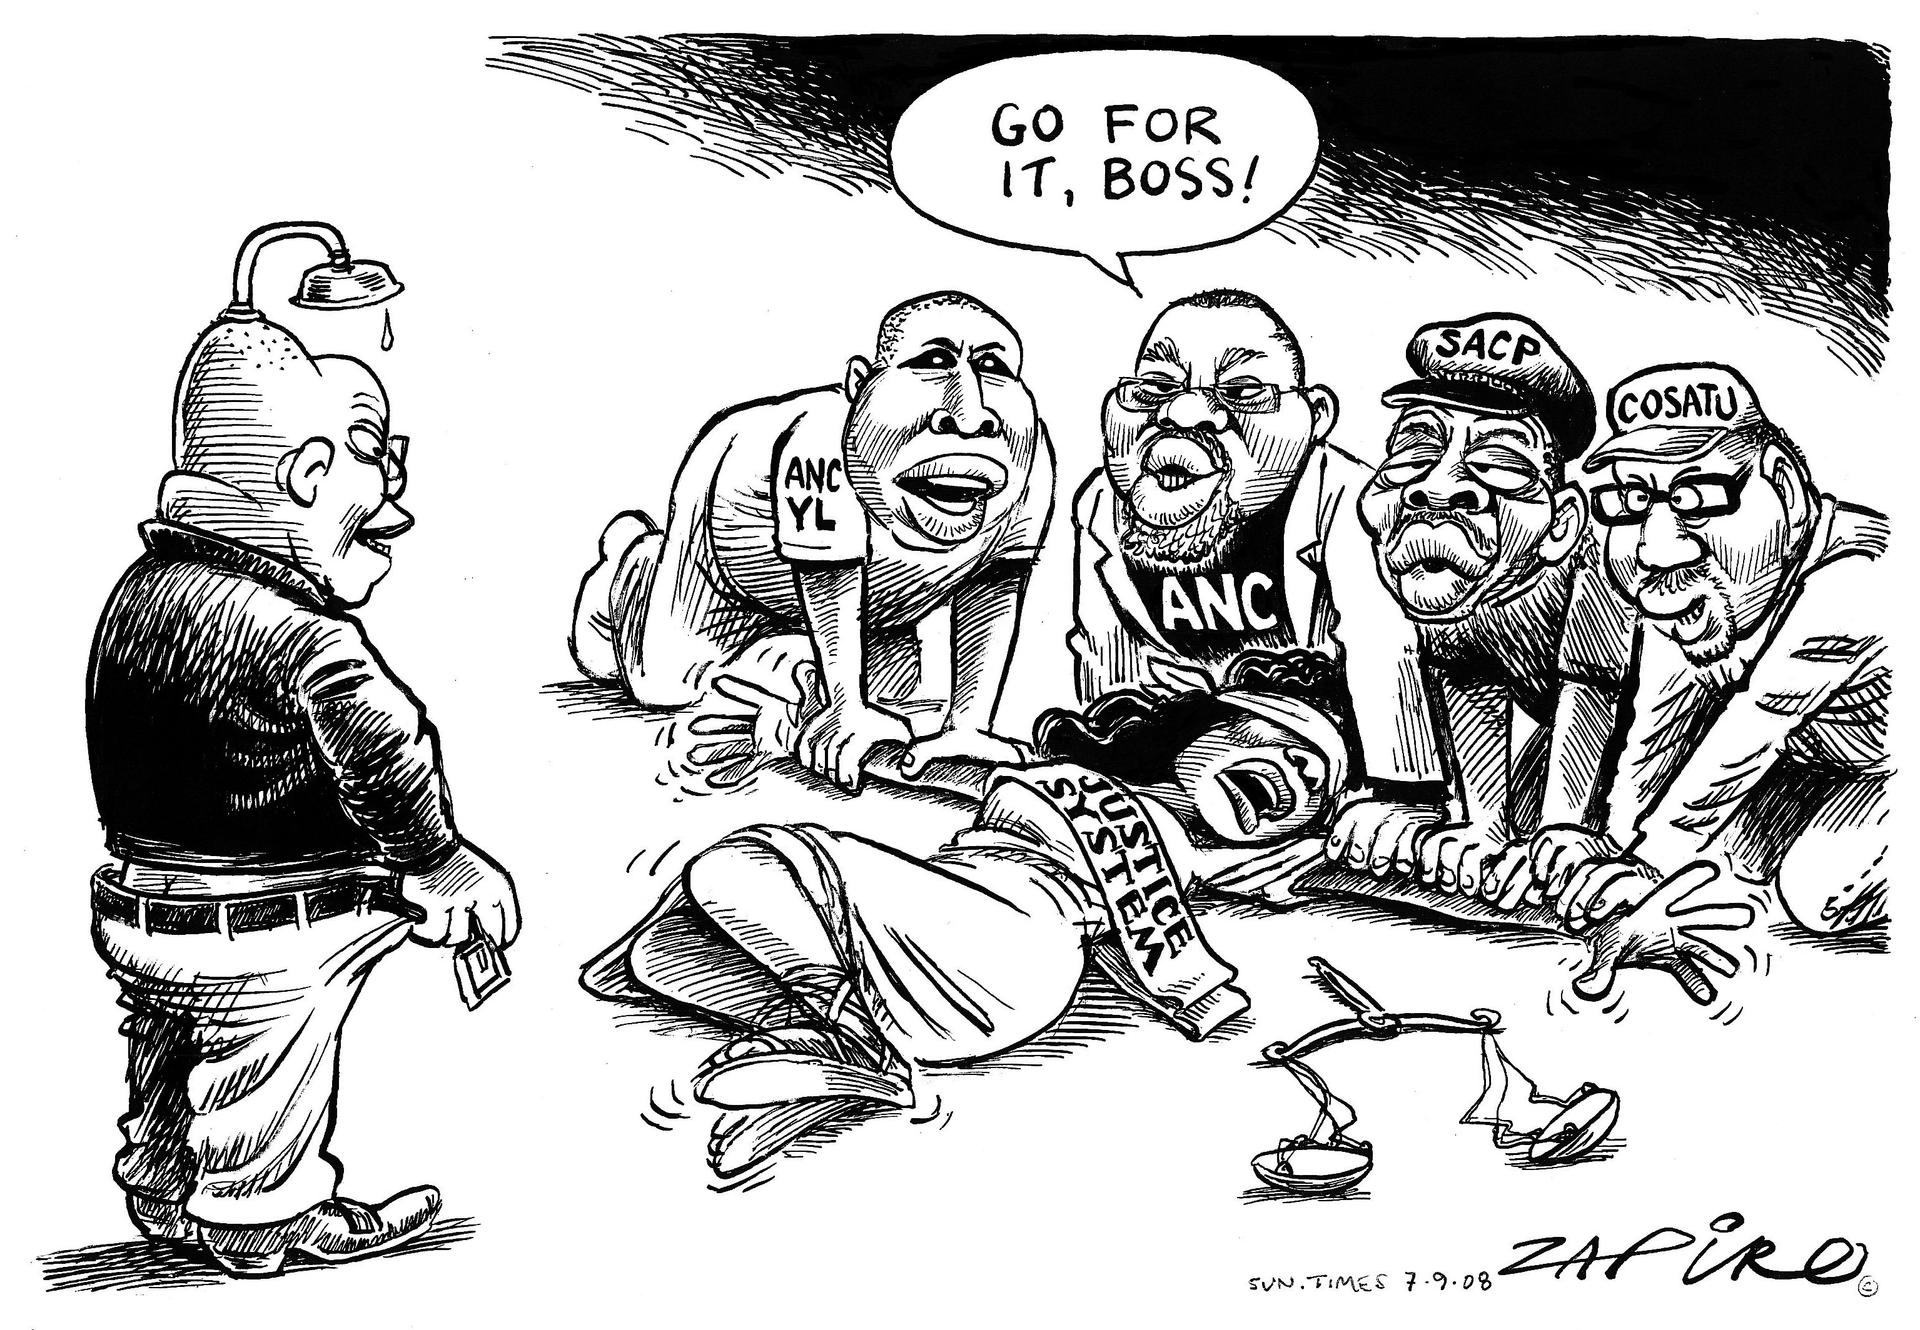 A Zapiro cartoon showing Jacob Zuma undoing his pants with Lady Justice being held down by Zuma's cronies and one of them says, 